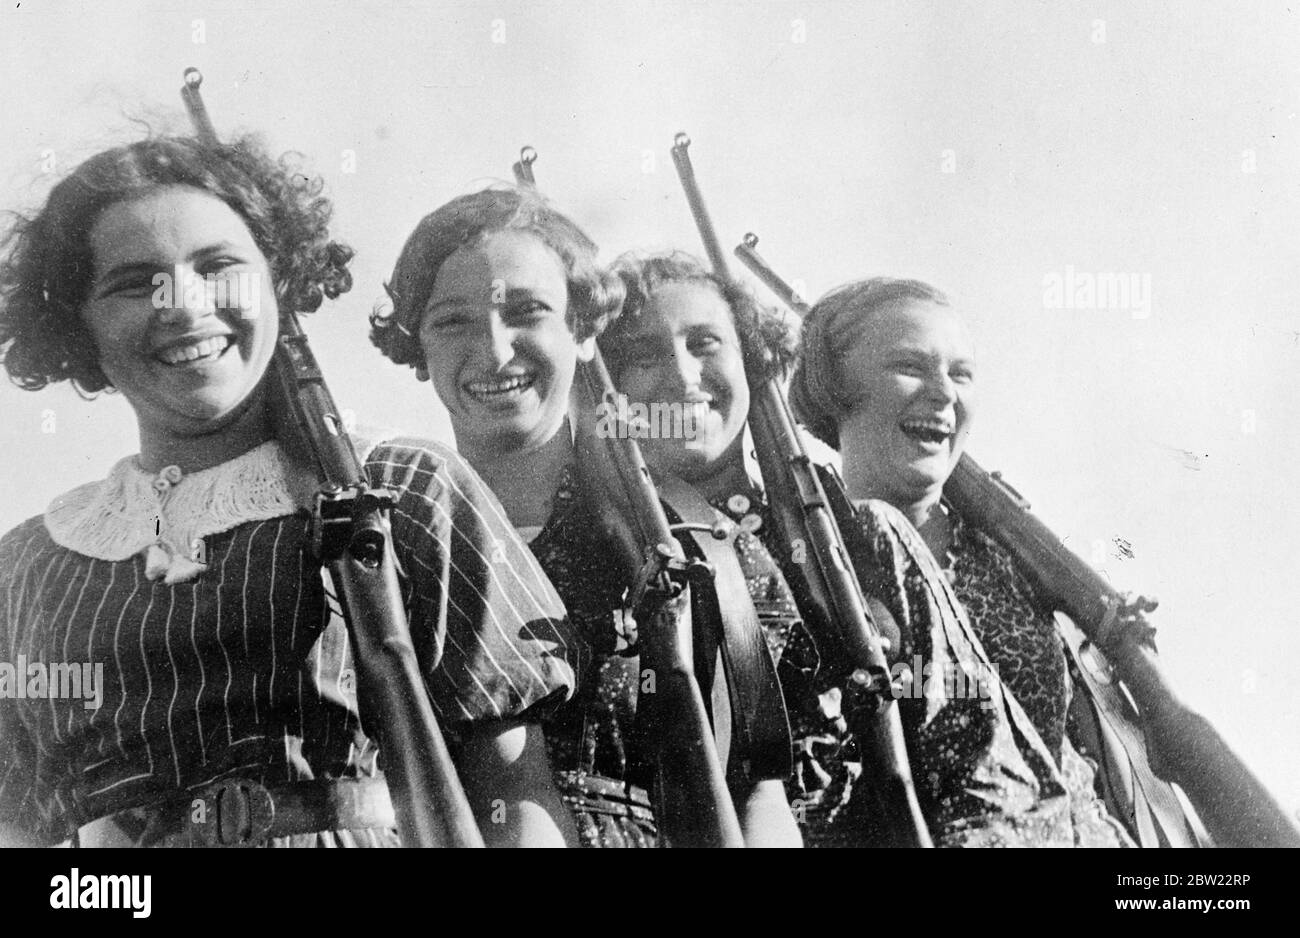 Young girls members of the pioneers (young communists) organisation in USSR now have lessons in sniping. Premier award in the school of marksmanship in the Voroshilov Sharpshooter badge named after the Commissioner for defence. 9 October 1937. Stock Photo